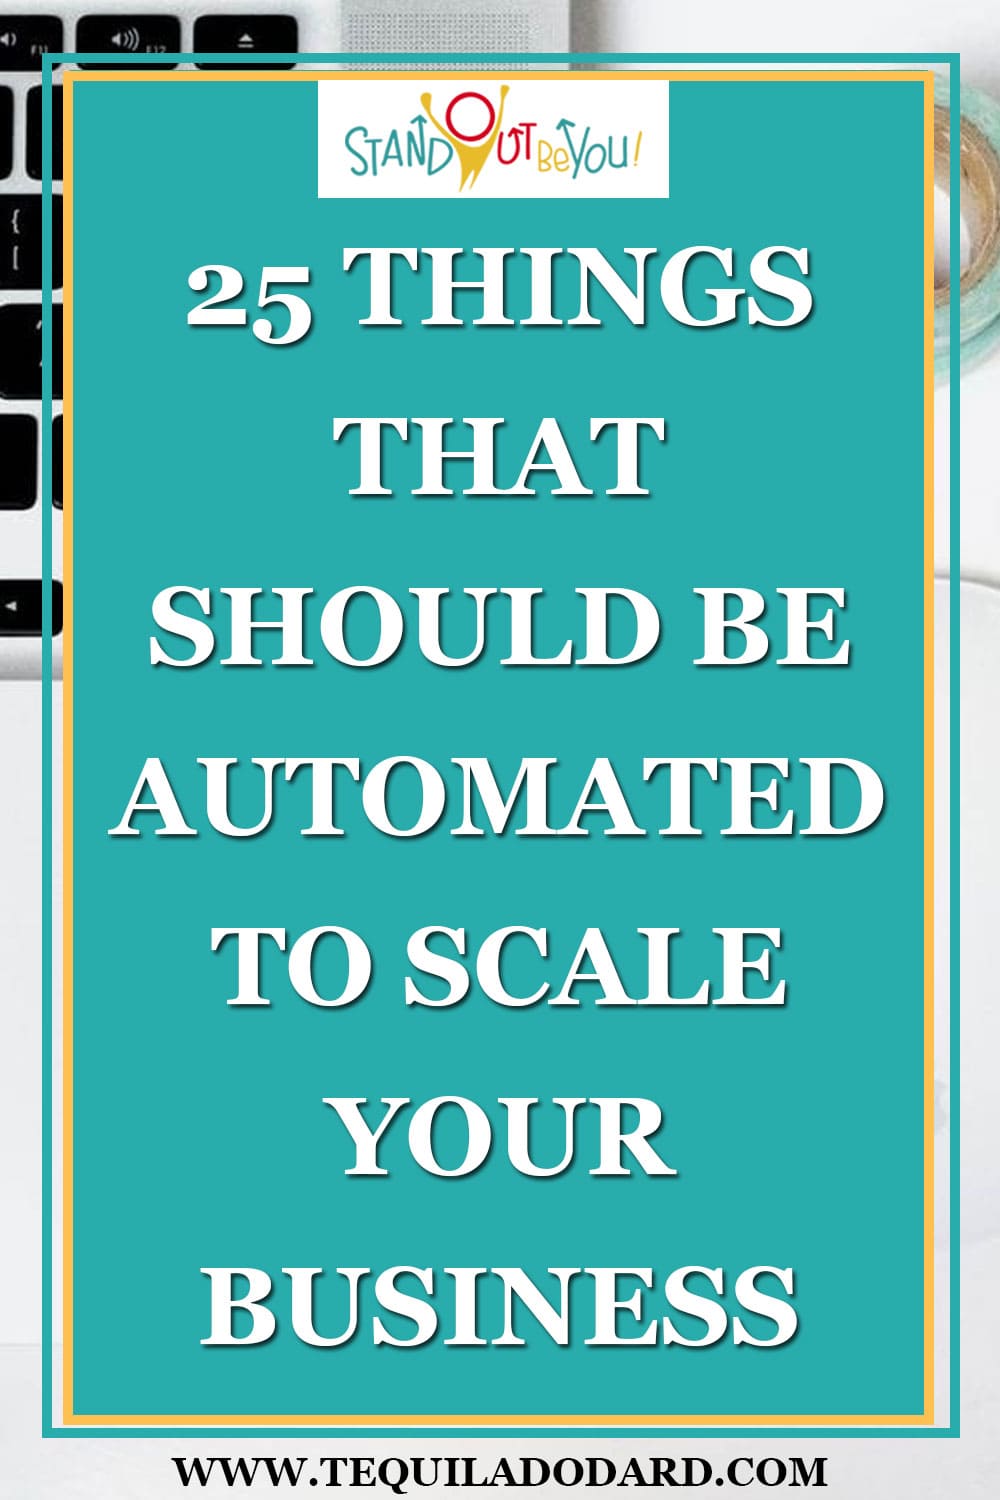 25-things-that-should-be-automated-to-scale-your-business-min(1)